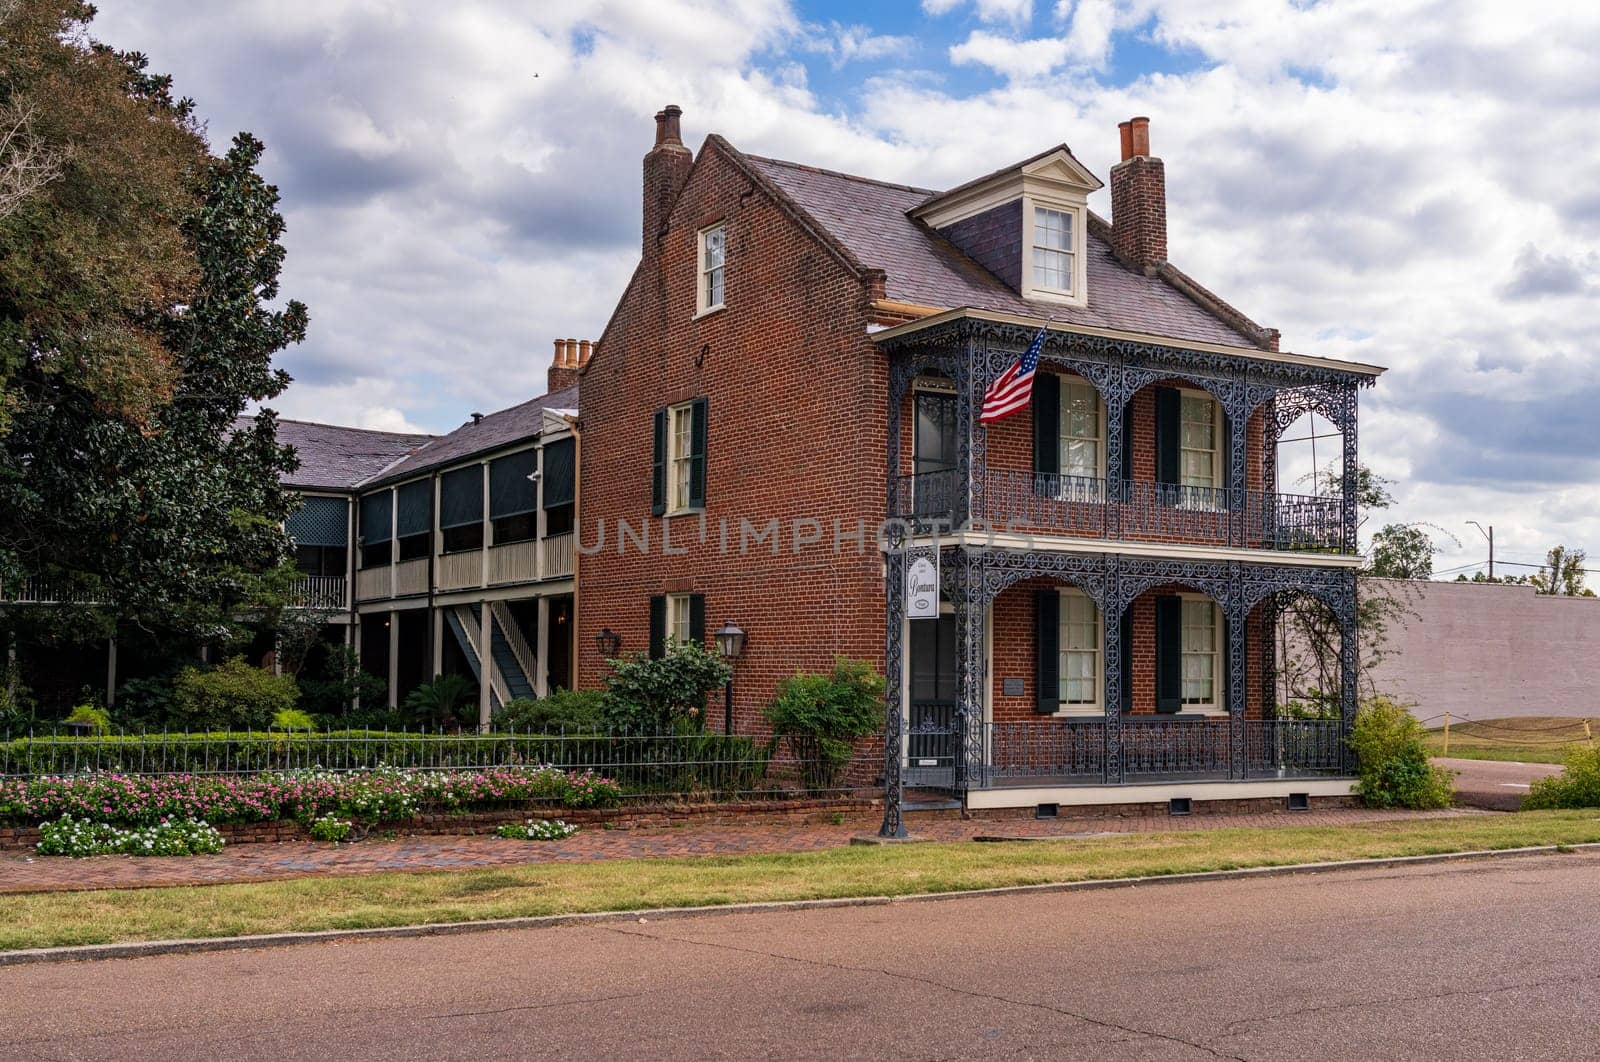 Facade of antebellum home in Natchez in Mississippi by steheap